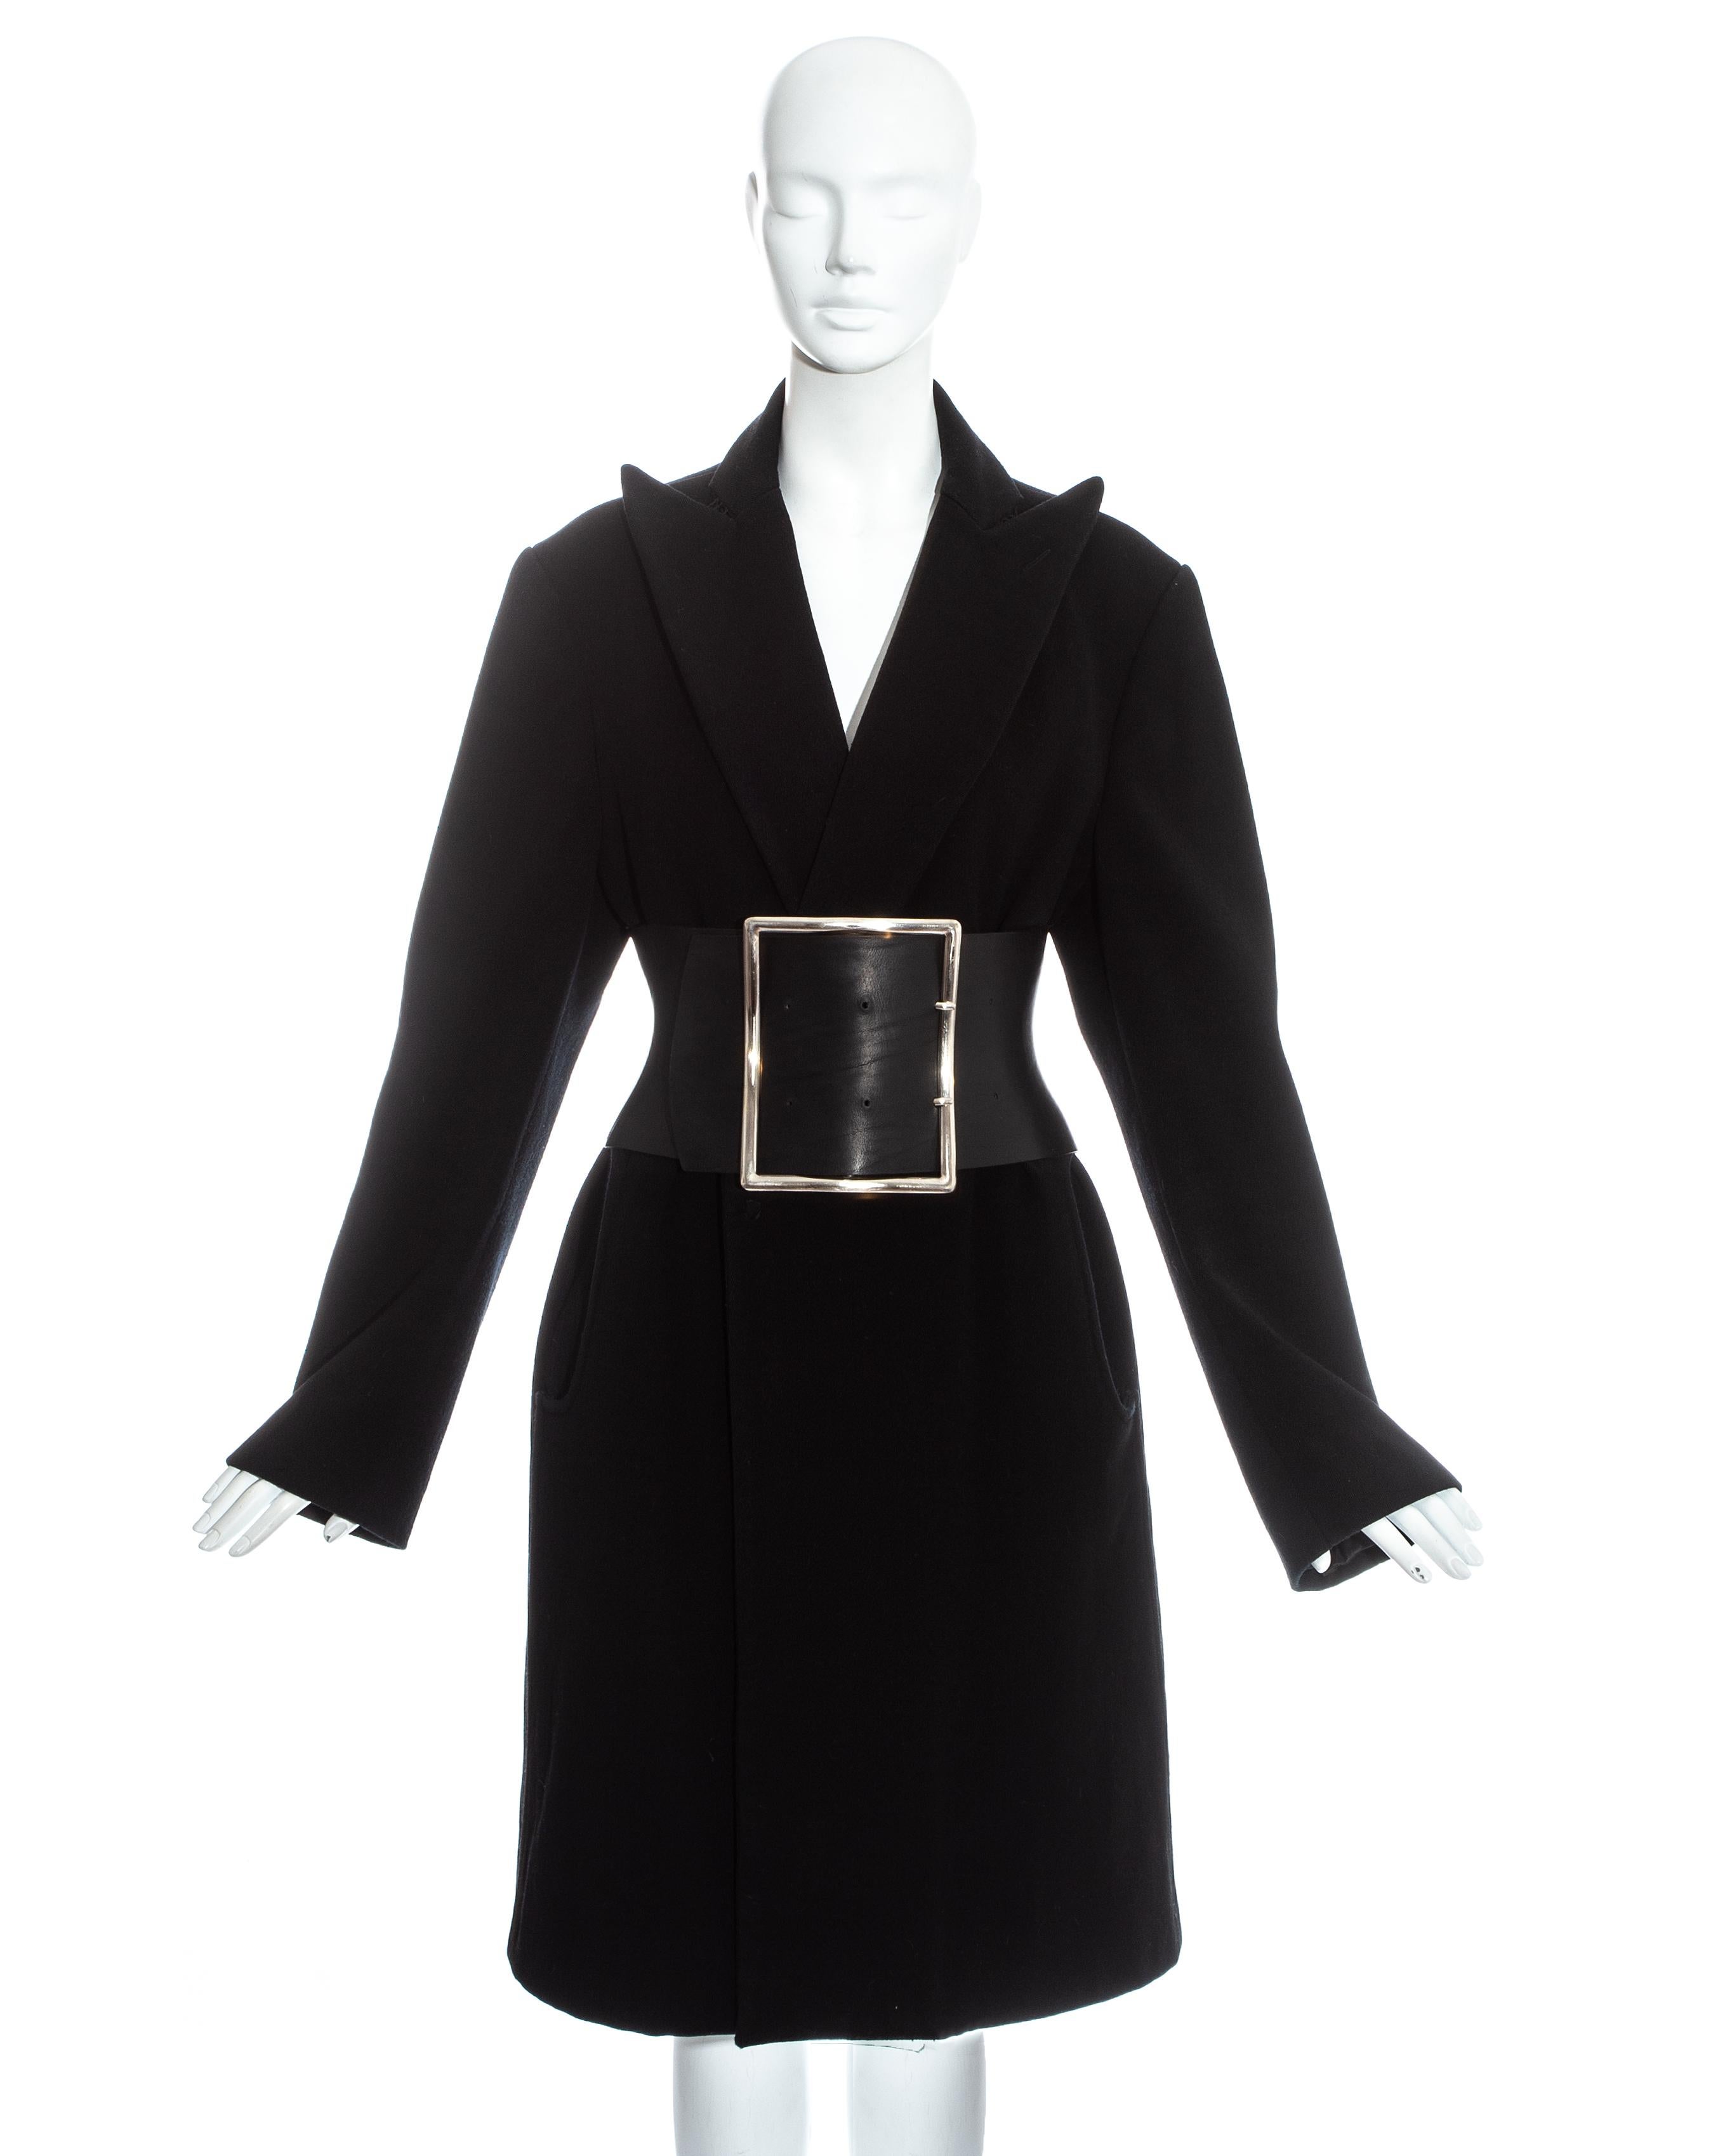 Martin Margiela; black wool oversized coat with exaggerated pointed lapels and snap button closure, paired with the signature extra wide leather Obi corset belt with metal buckle and adjustable fastening at the back.

Fall-Winter 1996

Notes on the